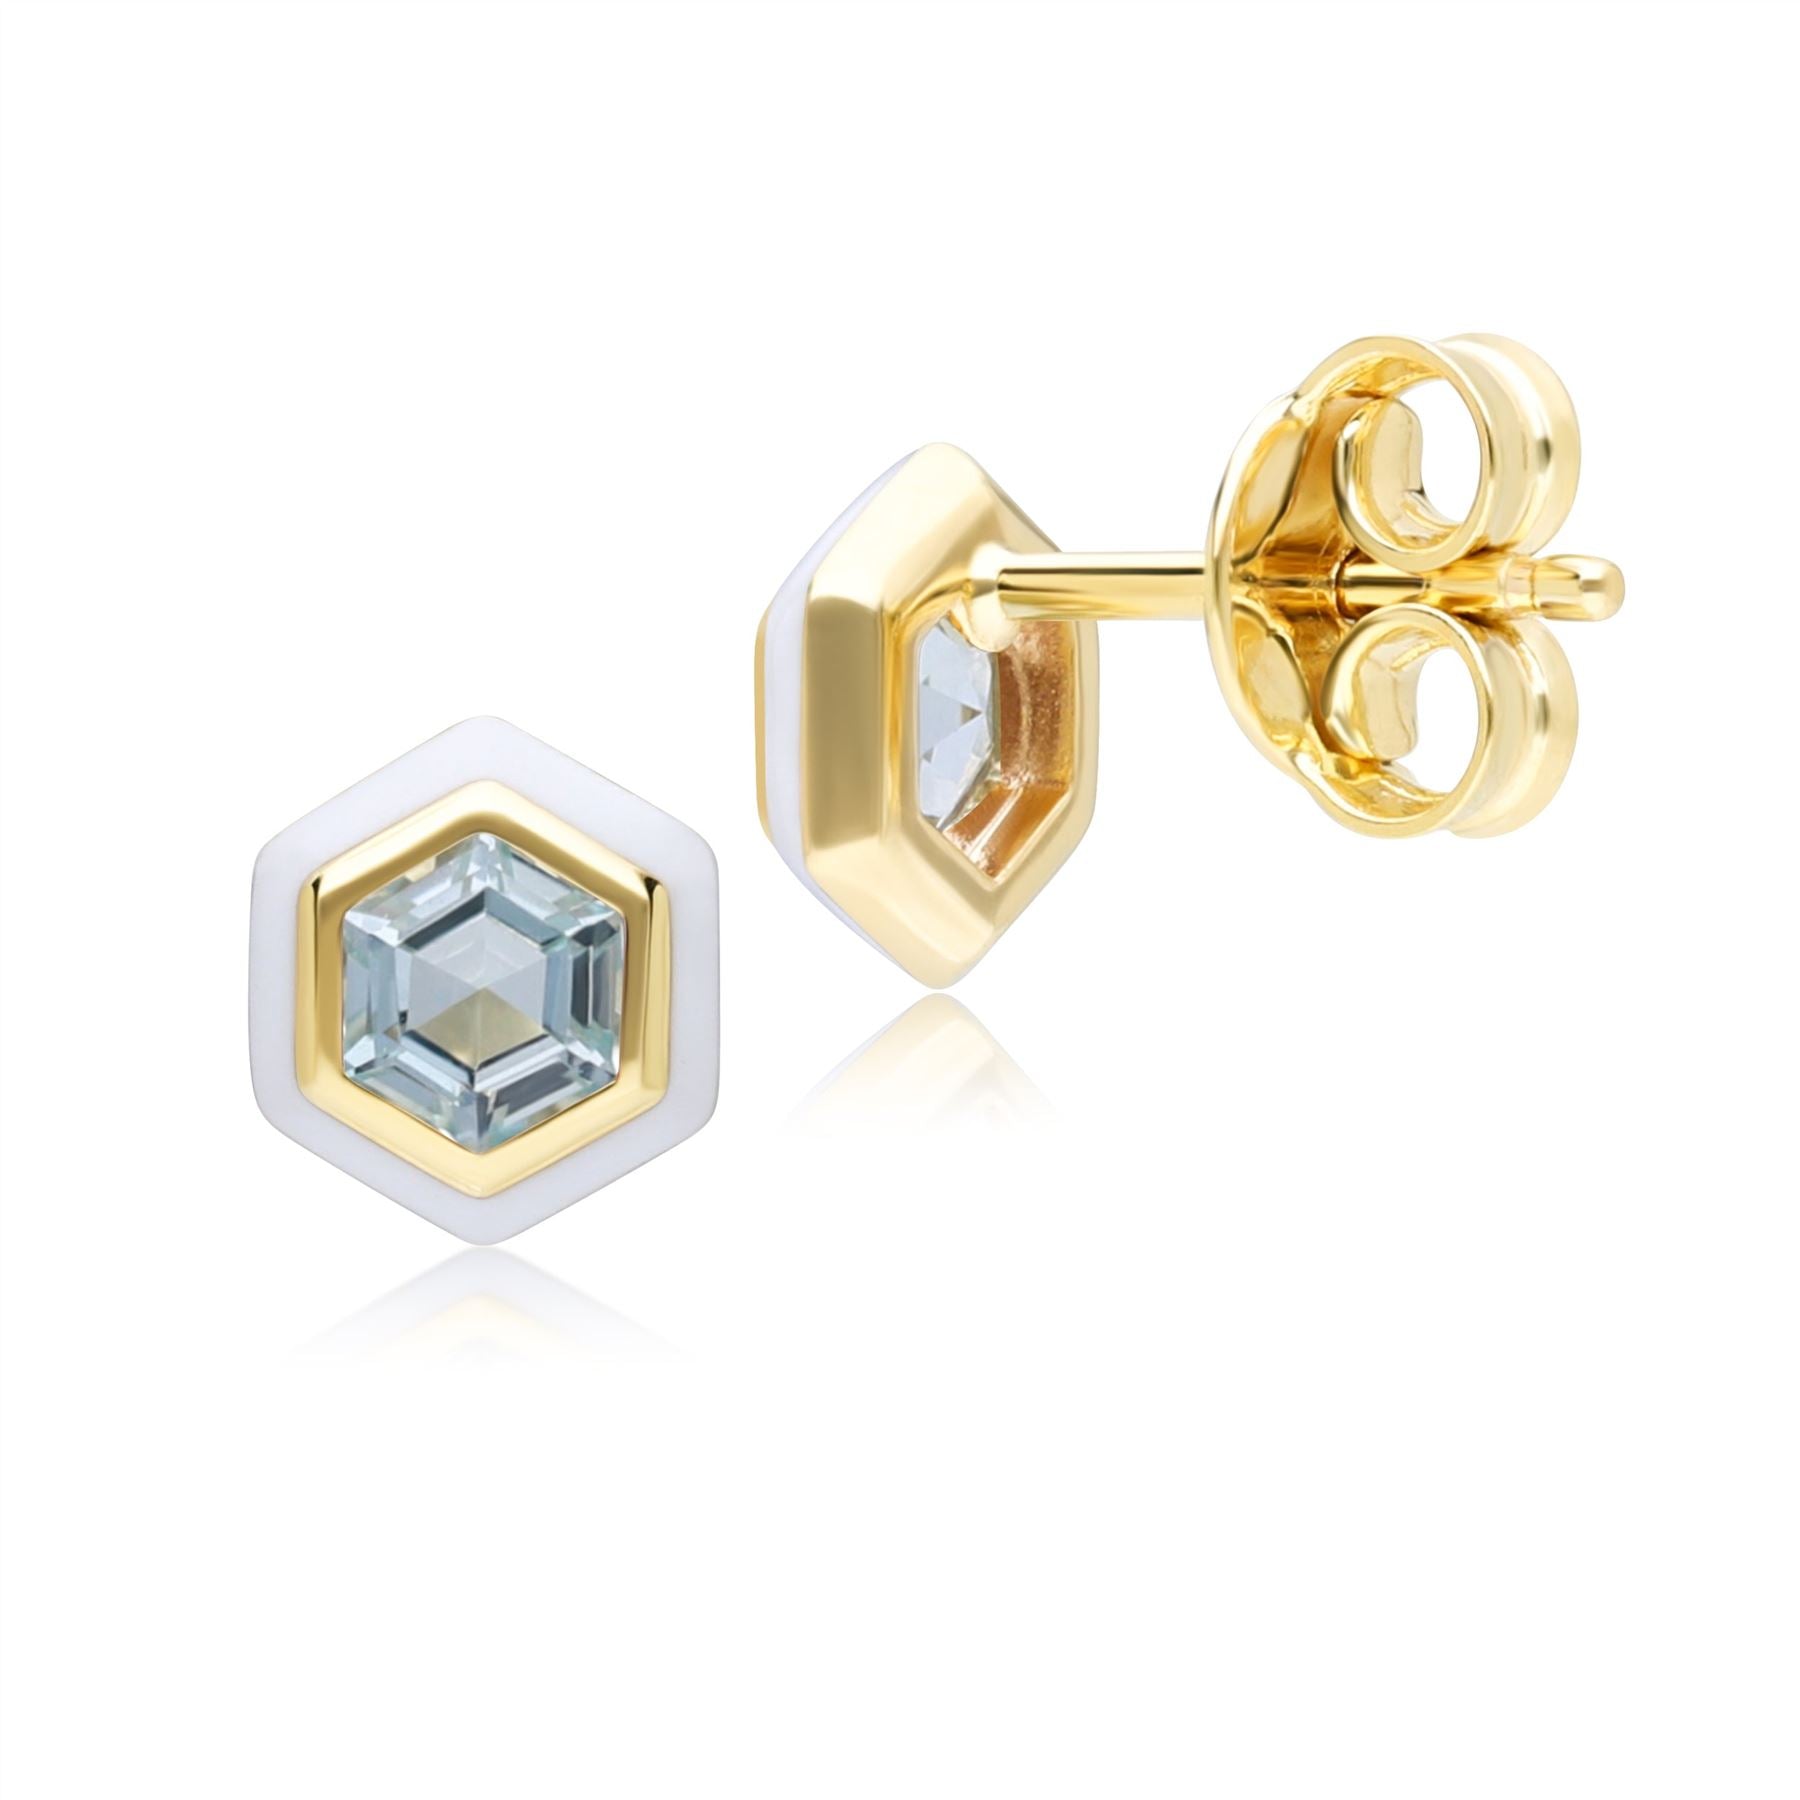 Geometric Hex Blue Topaz and White Enamel Stud Earrings in Gold Plated Sterling Silver Back